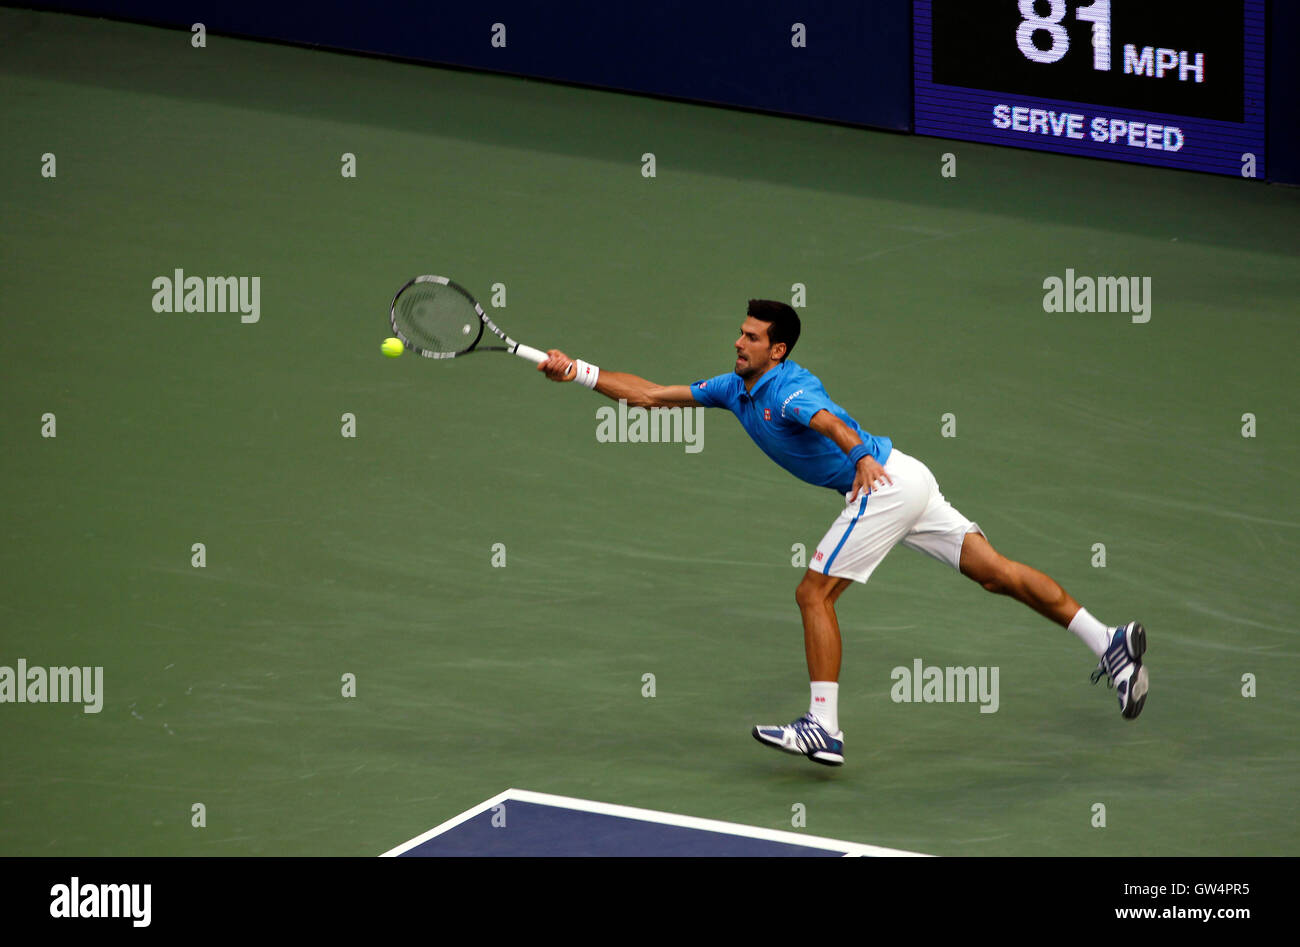 New York, United States. 11th Sep, 2016. Novak Djokovic scrambles for a forehand during the United States Open Tennis Championships Final against Switzerland's Stan Warwinka at Flushing Meadows, New York on Sunday, September 11th. Credit:  Adam Stoltman/Alamy Live News Stock Photo